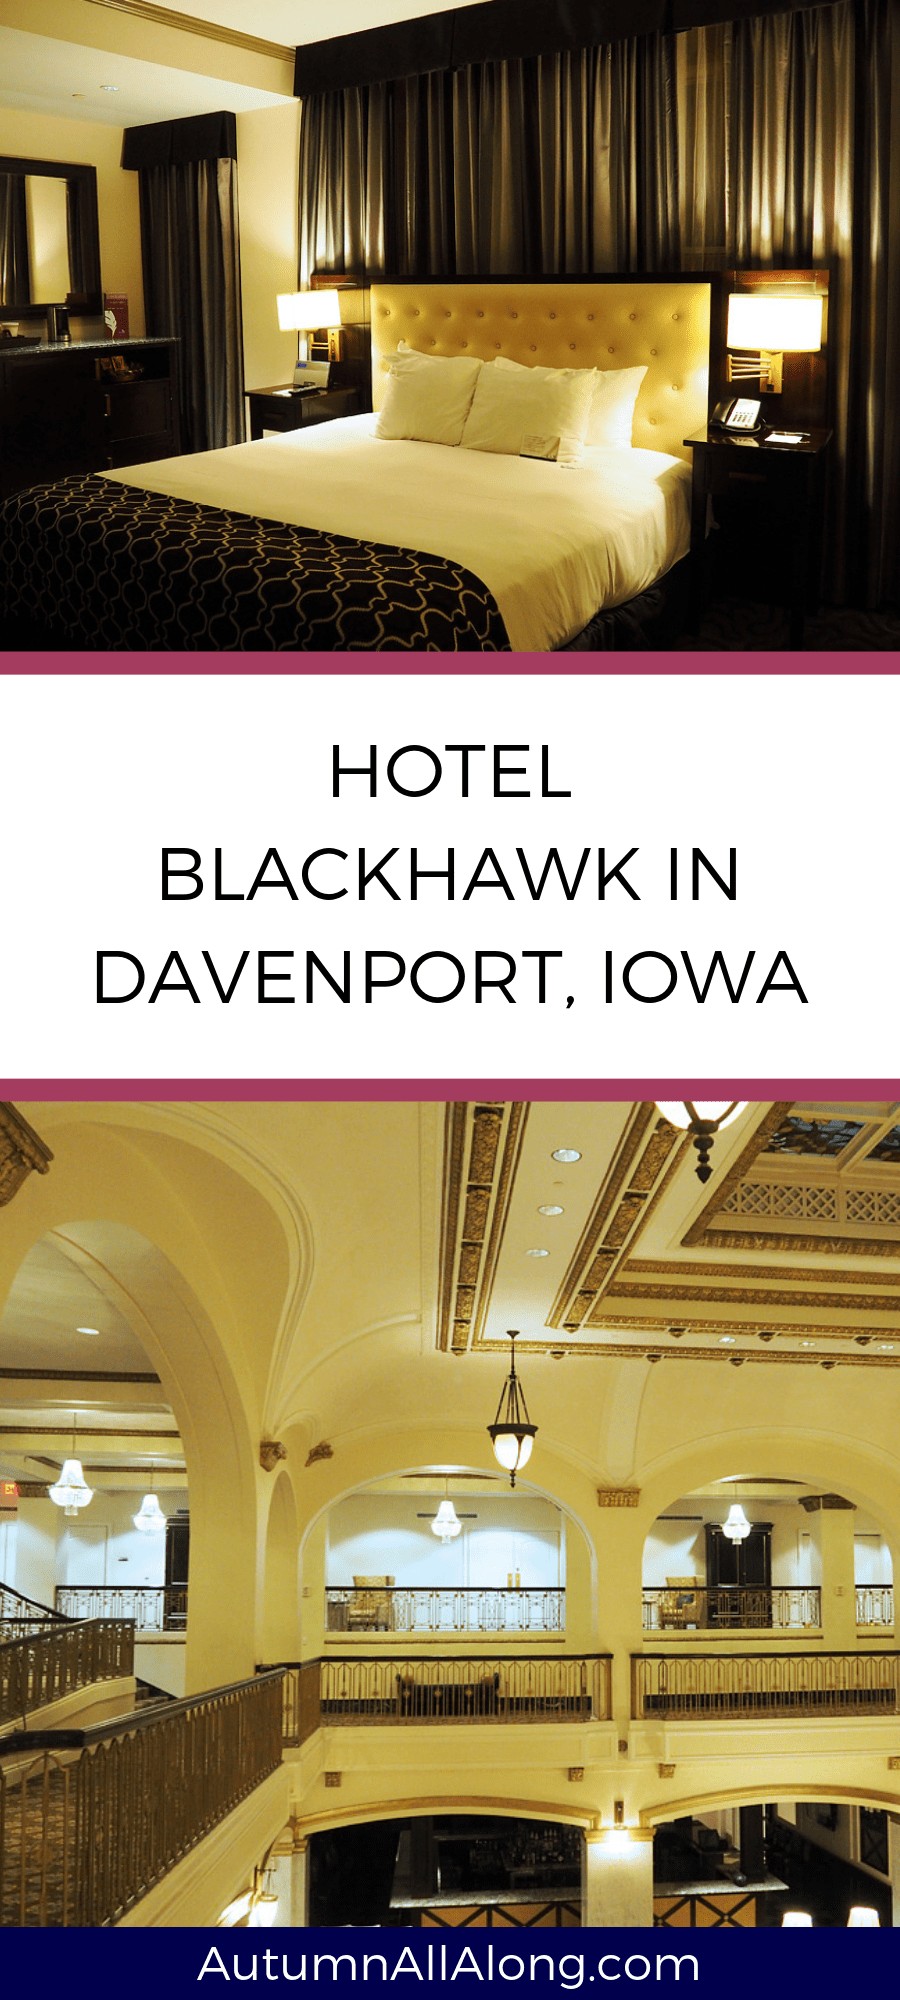 Hotel Blackhawk is a historic hotel in Davenport, Iowa. If you're a fan of classic movie stars, this is definitely one you have to visit. | via Autumn All Along